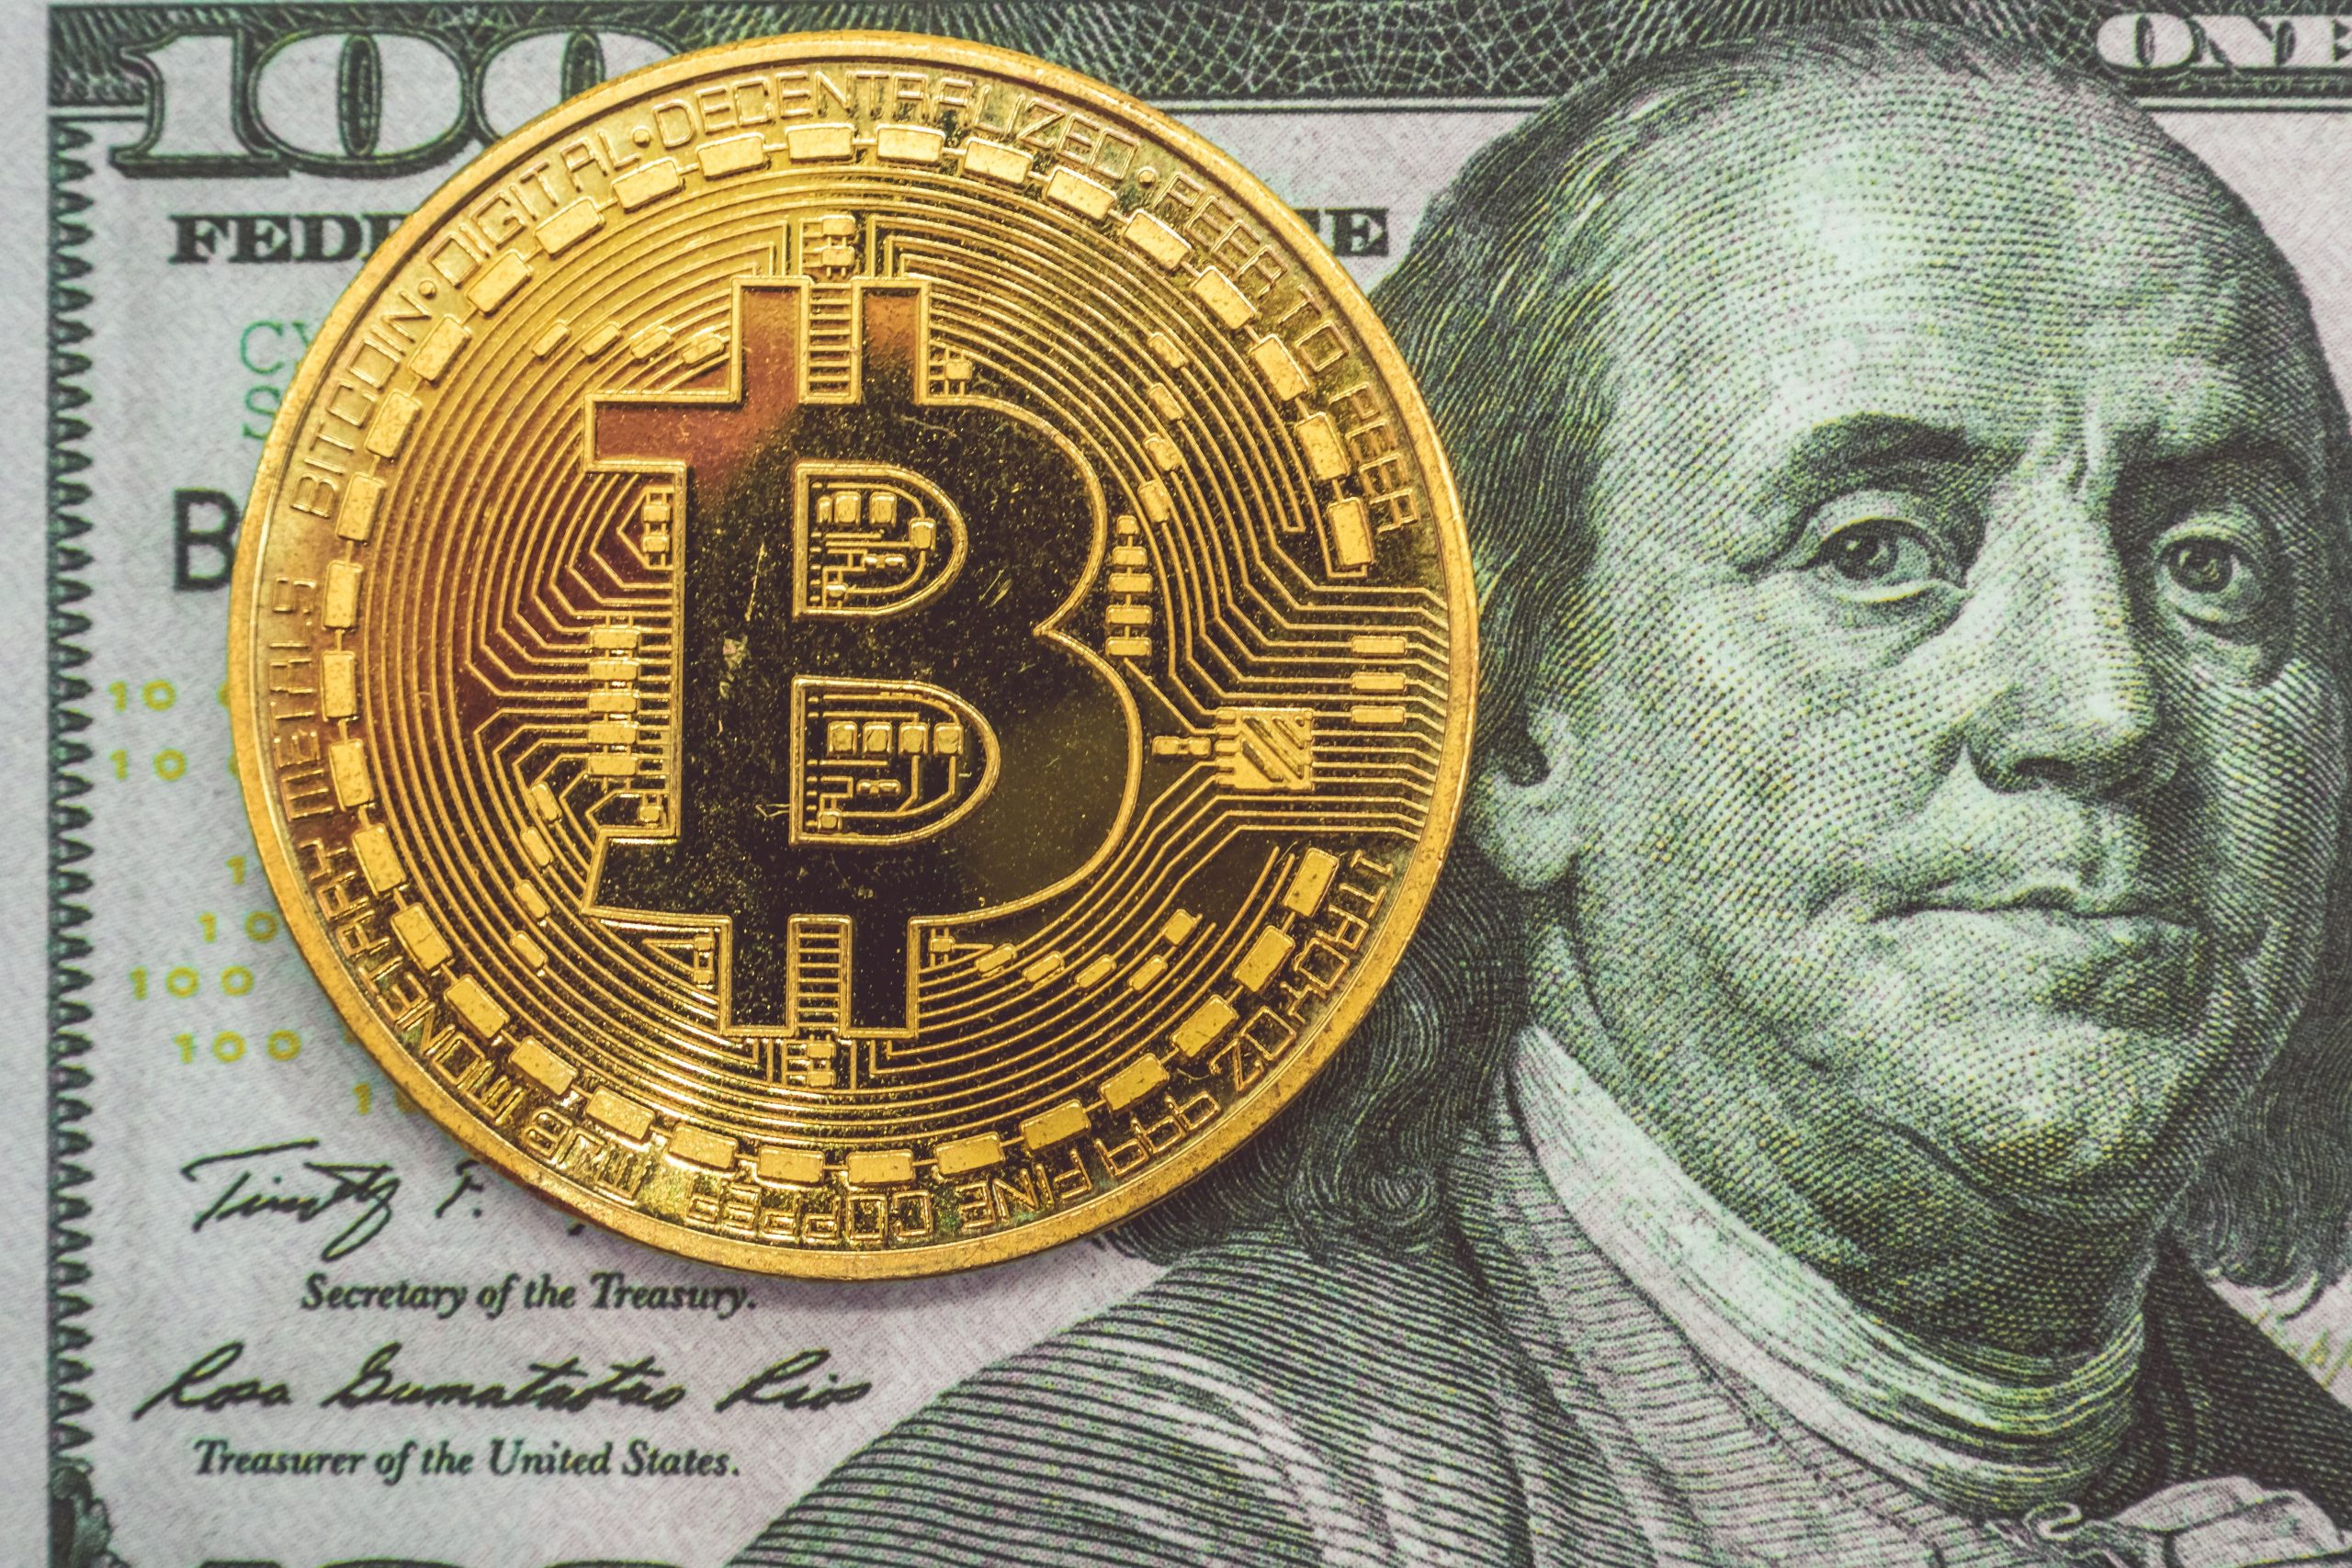 How does passing of the new $1.9 trillion stimulus package impact Bitcoin